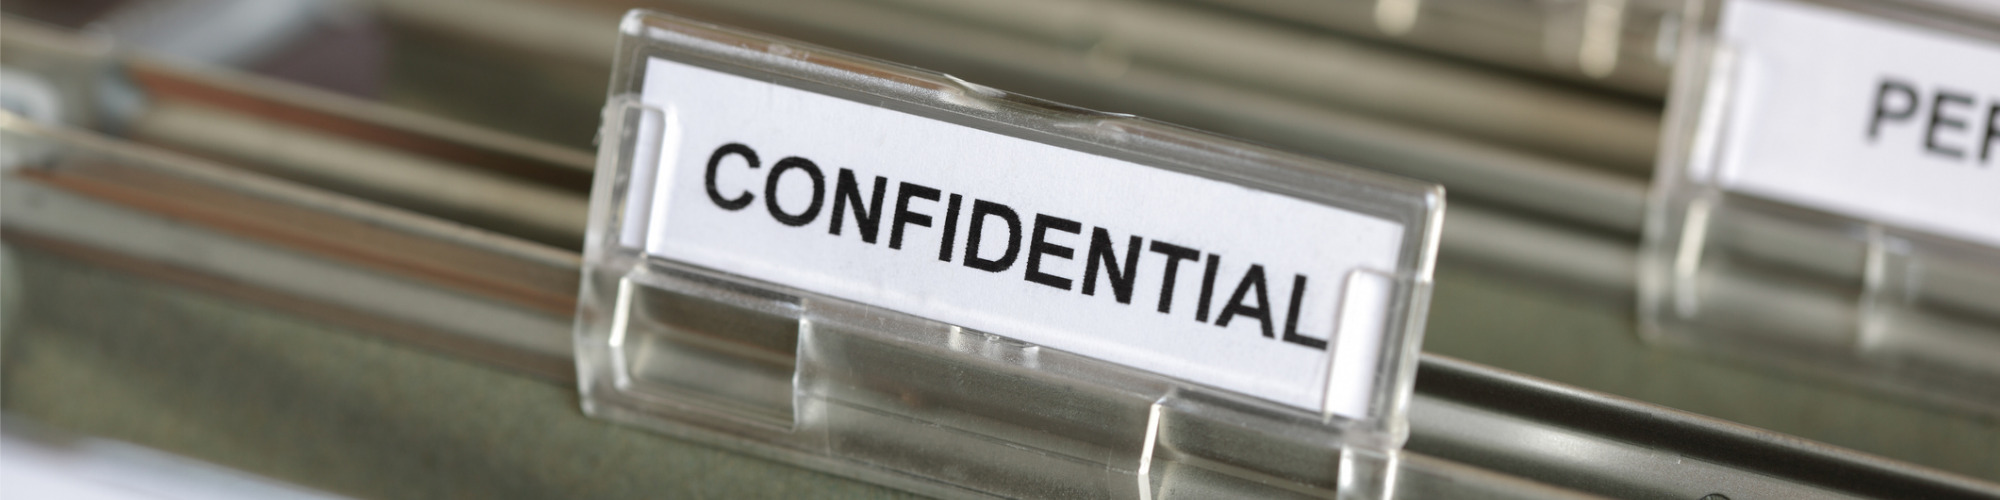 Client Confidentiality & Conflicts for Conveyancing Support Staff - Live at Your Desk